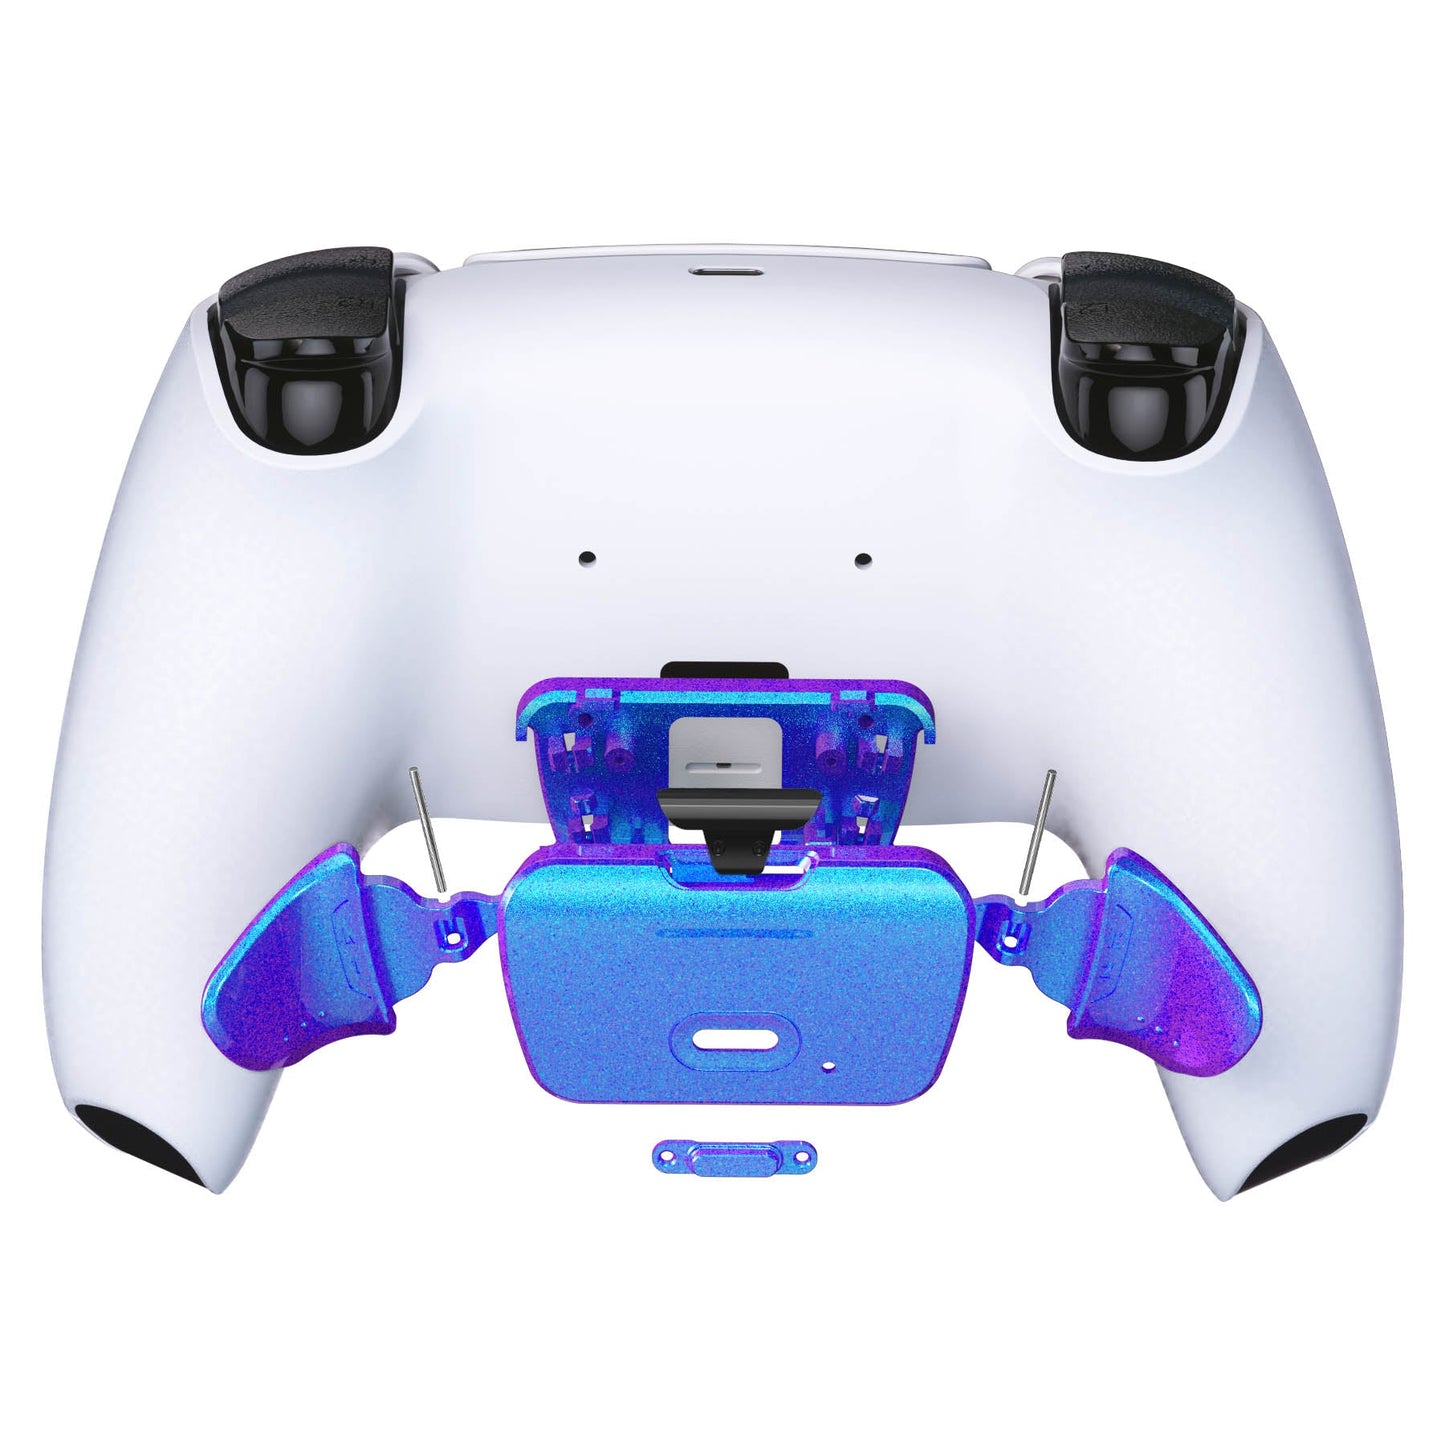 eXtremeRate Retail Chameleon Purple Blue Replacement Redesigned K1 K2 Back Button Housing Shell for ps5 Controller eXtremerate RISE Remap Kit - Controller & RISE Remap Board NOT Included - WPFP3001